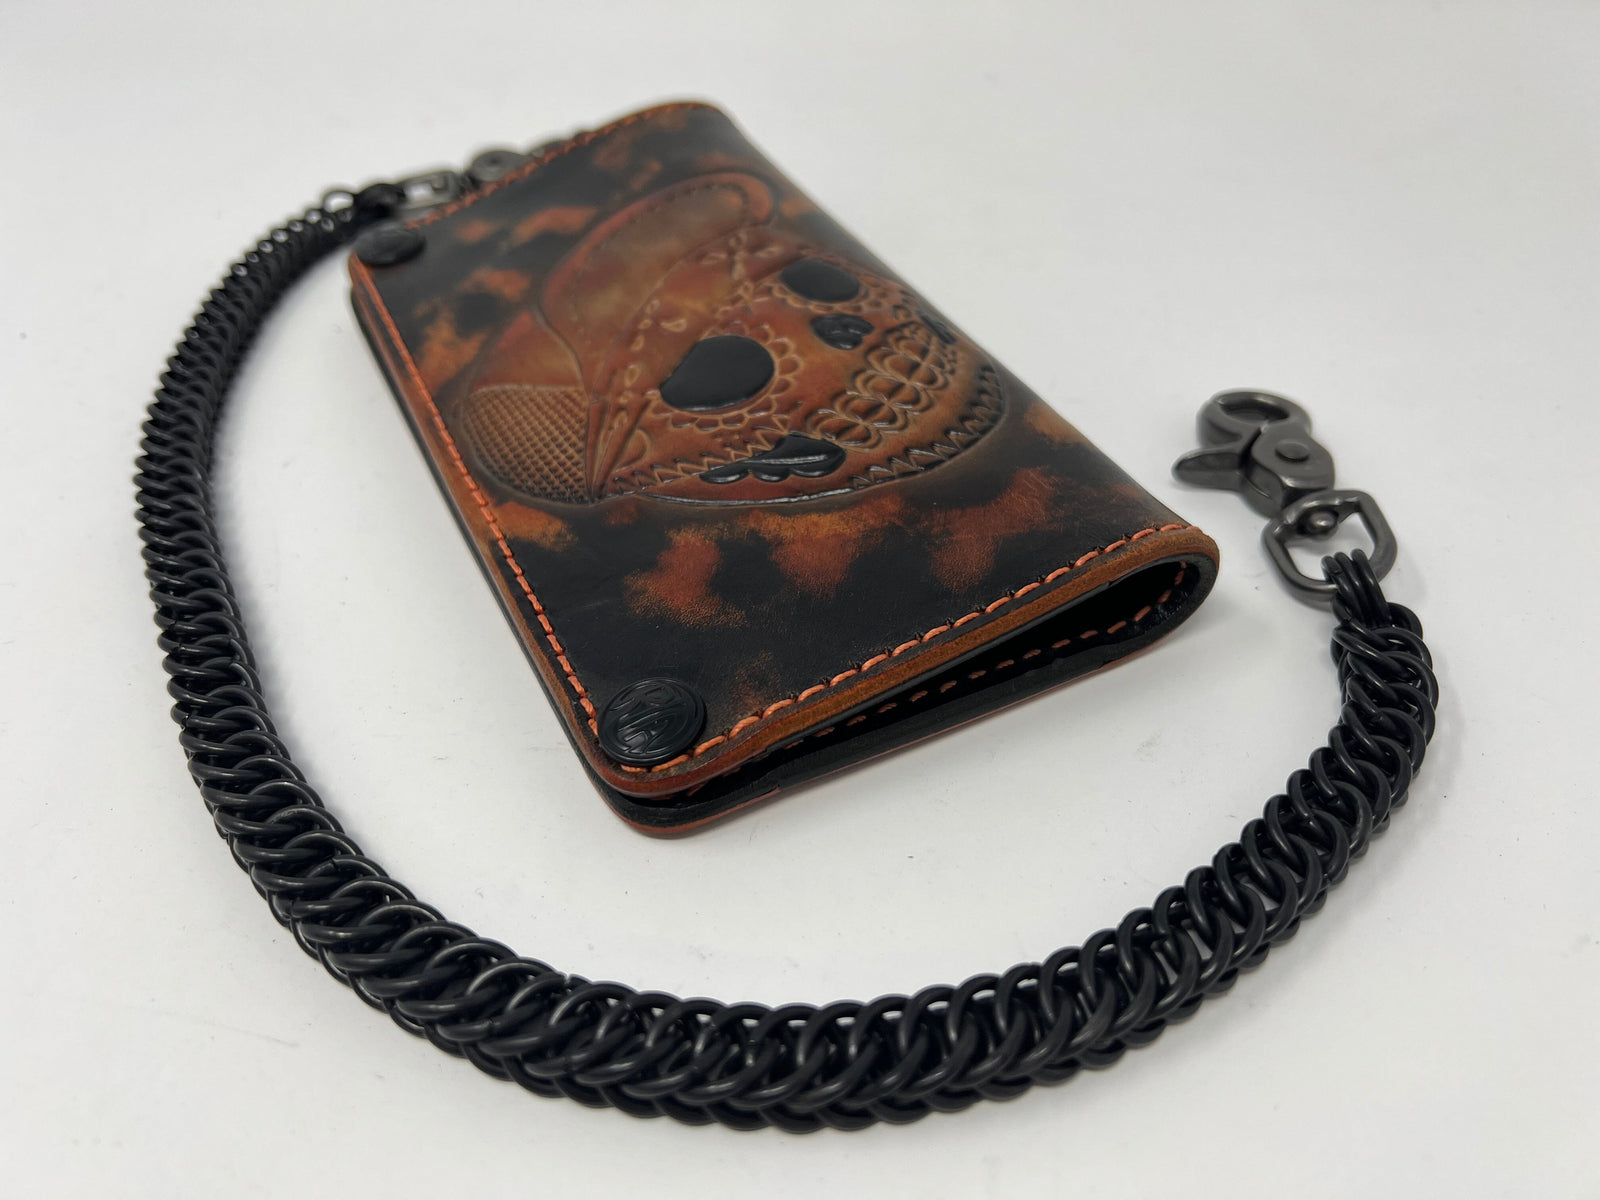 Trifold Leather Chain Wallet - Anvil Customs